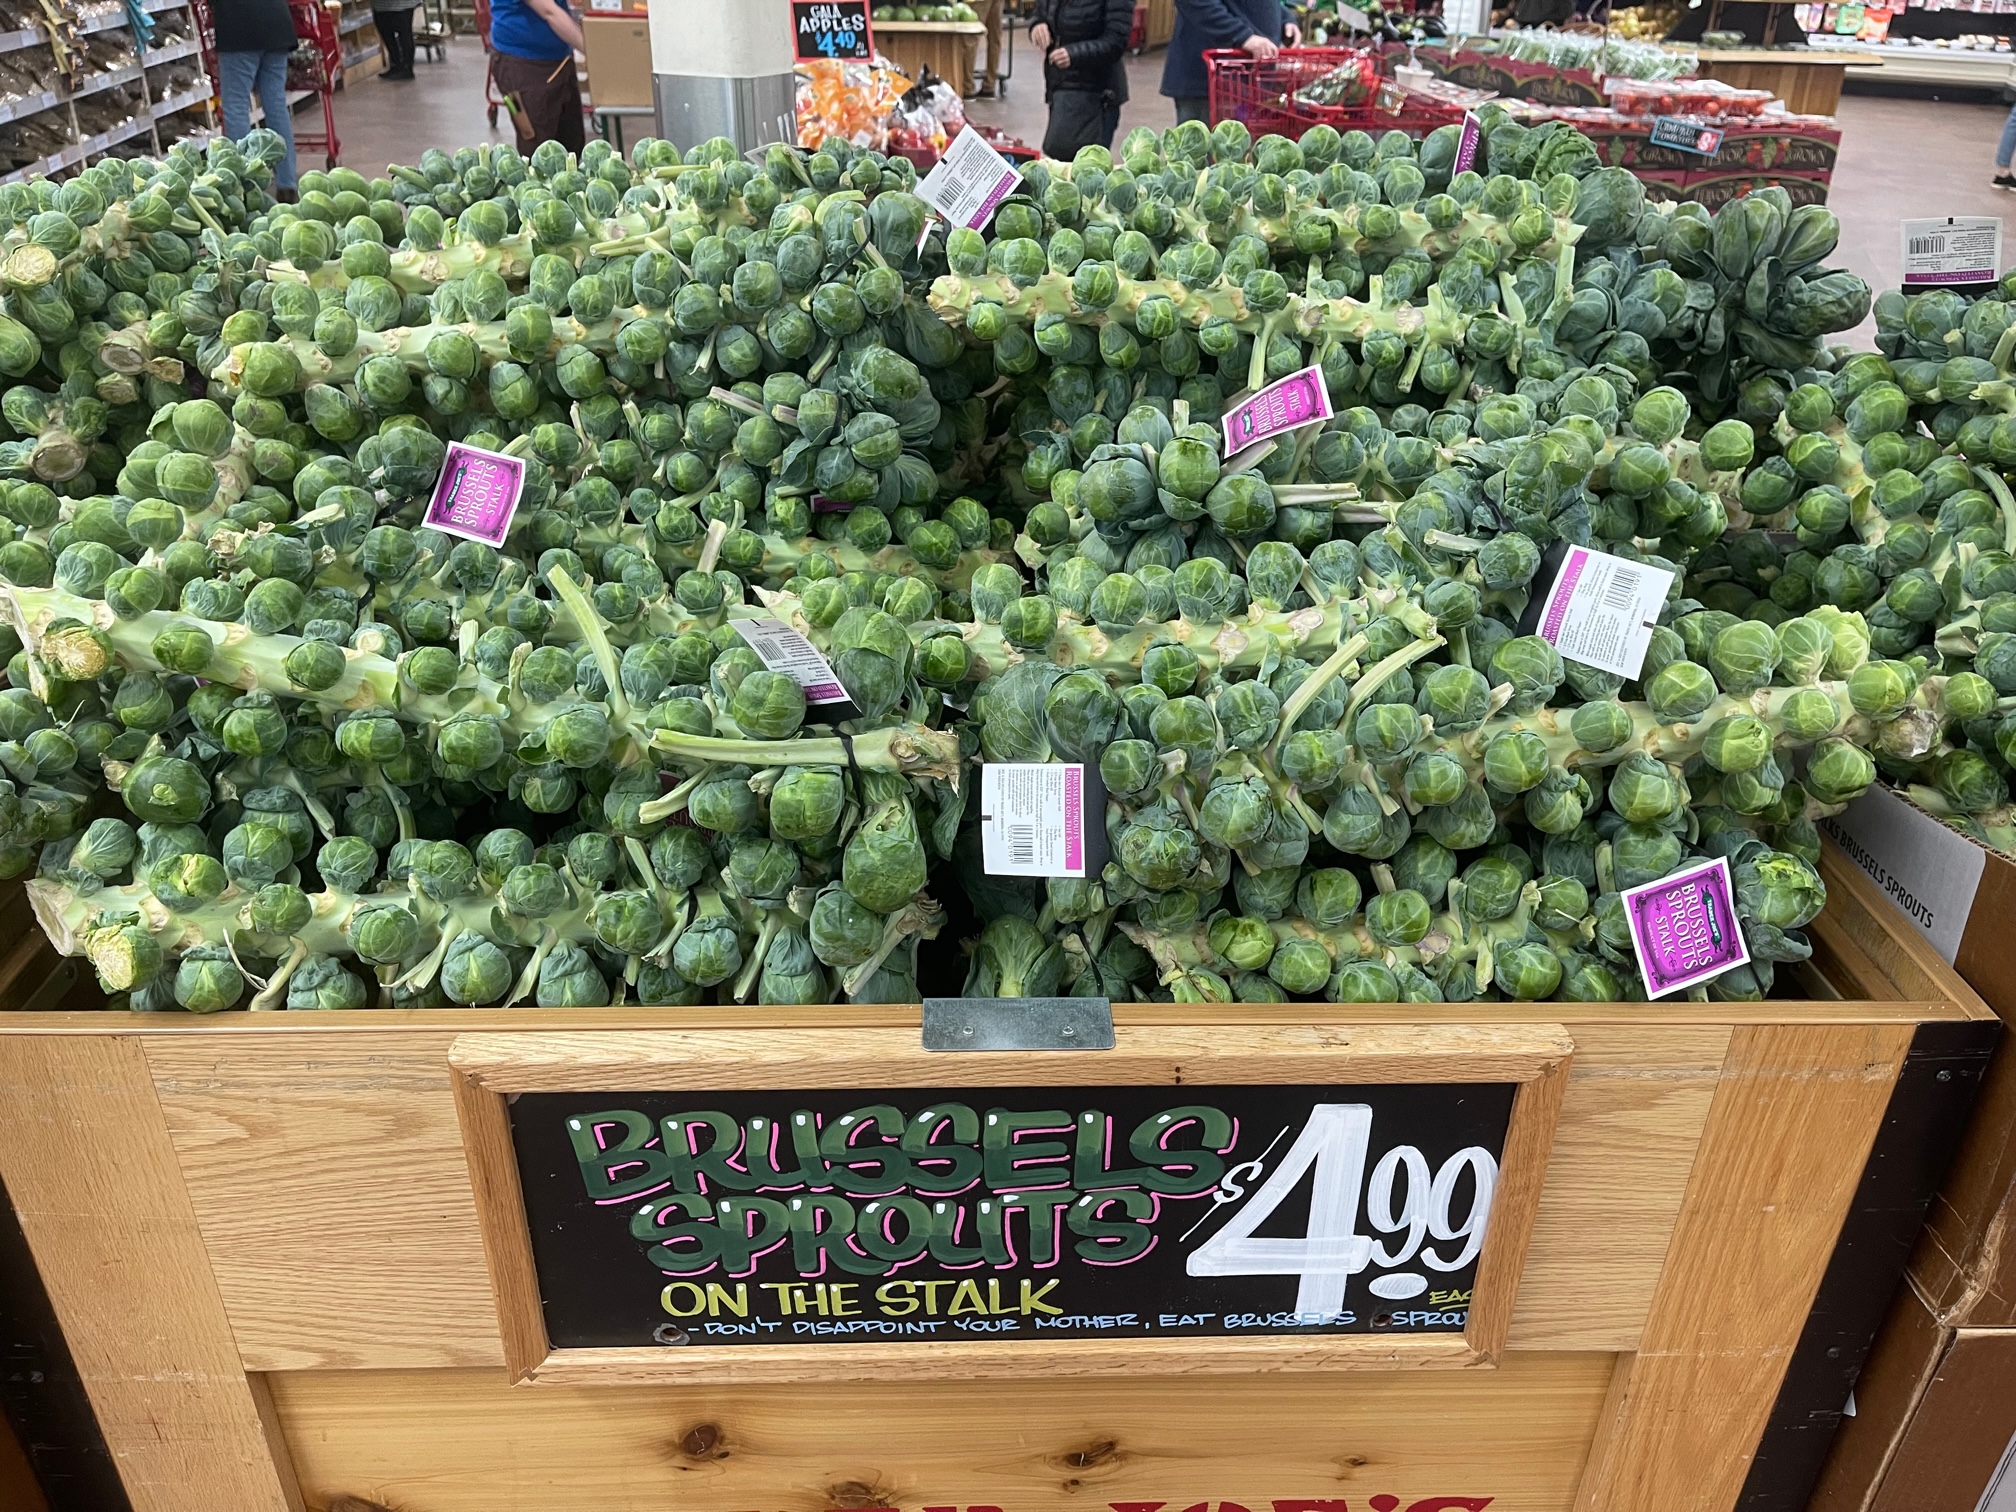 Should I Buy Brussels Sprouts On The Stalk?